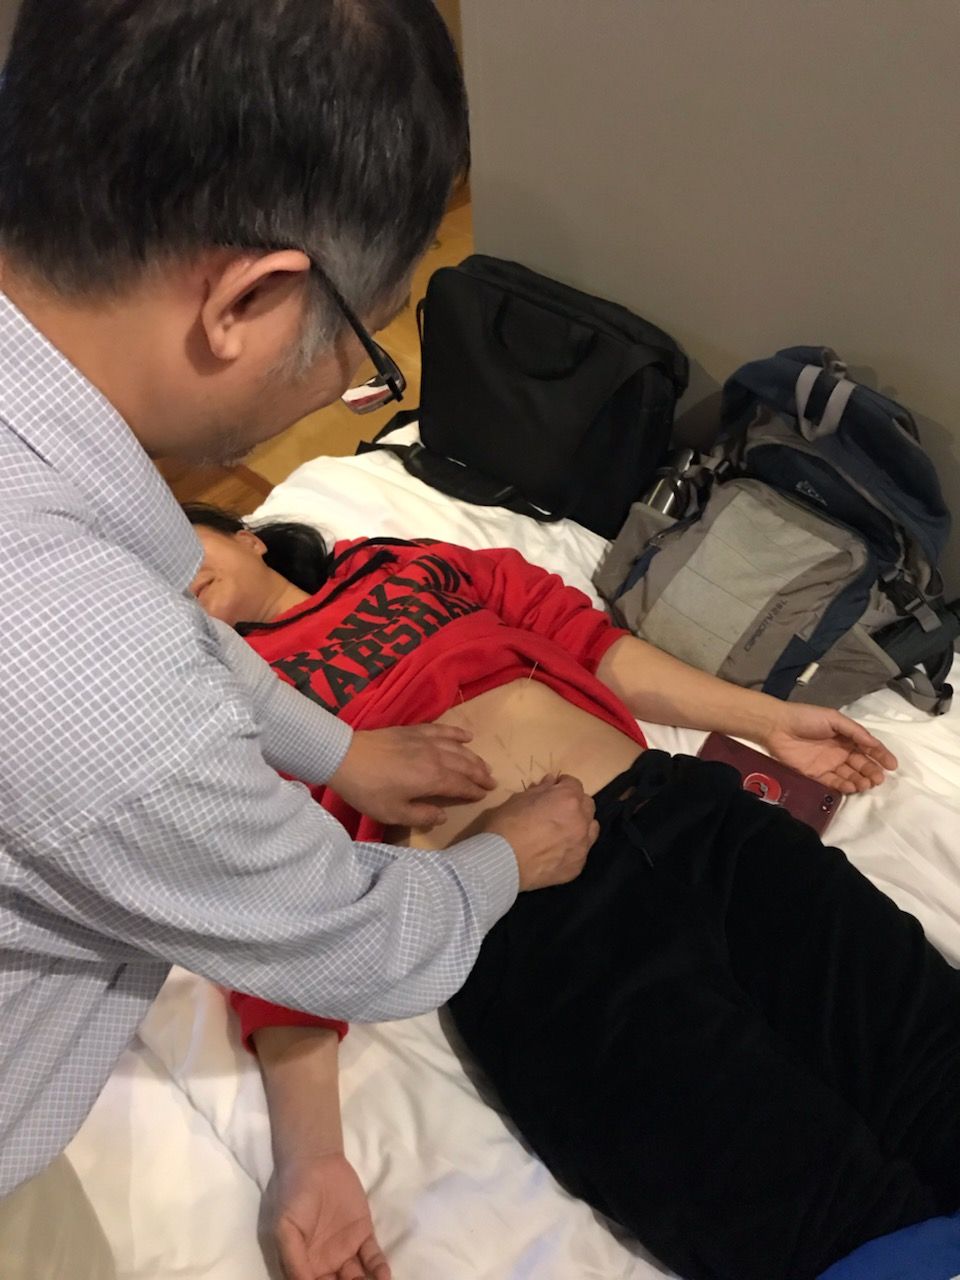 Dr. Yun Yu, MD Performing a Acupuncture Treatment